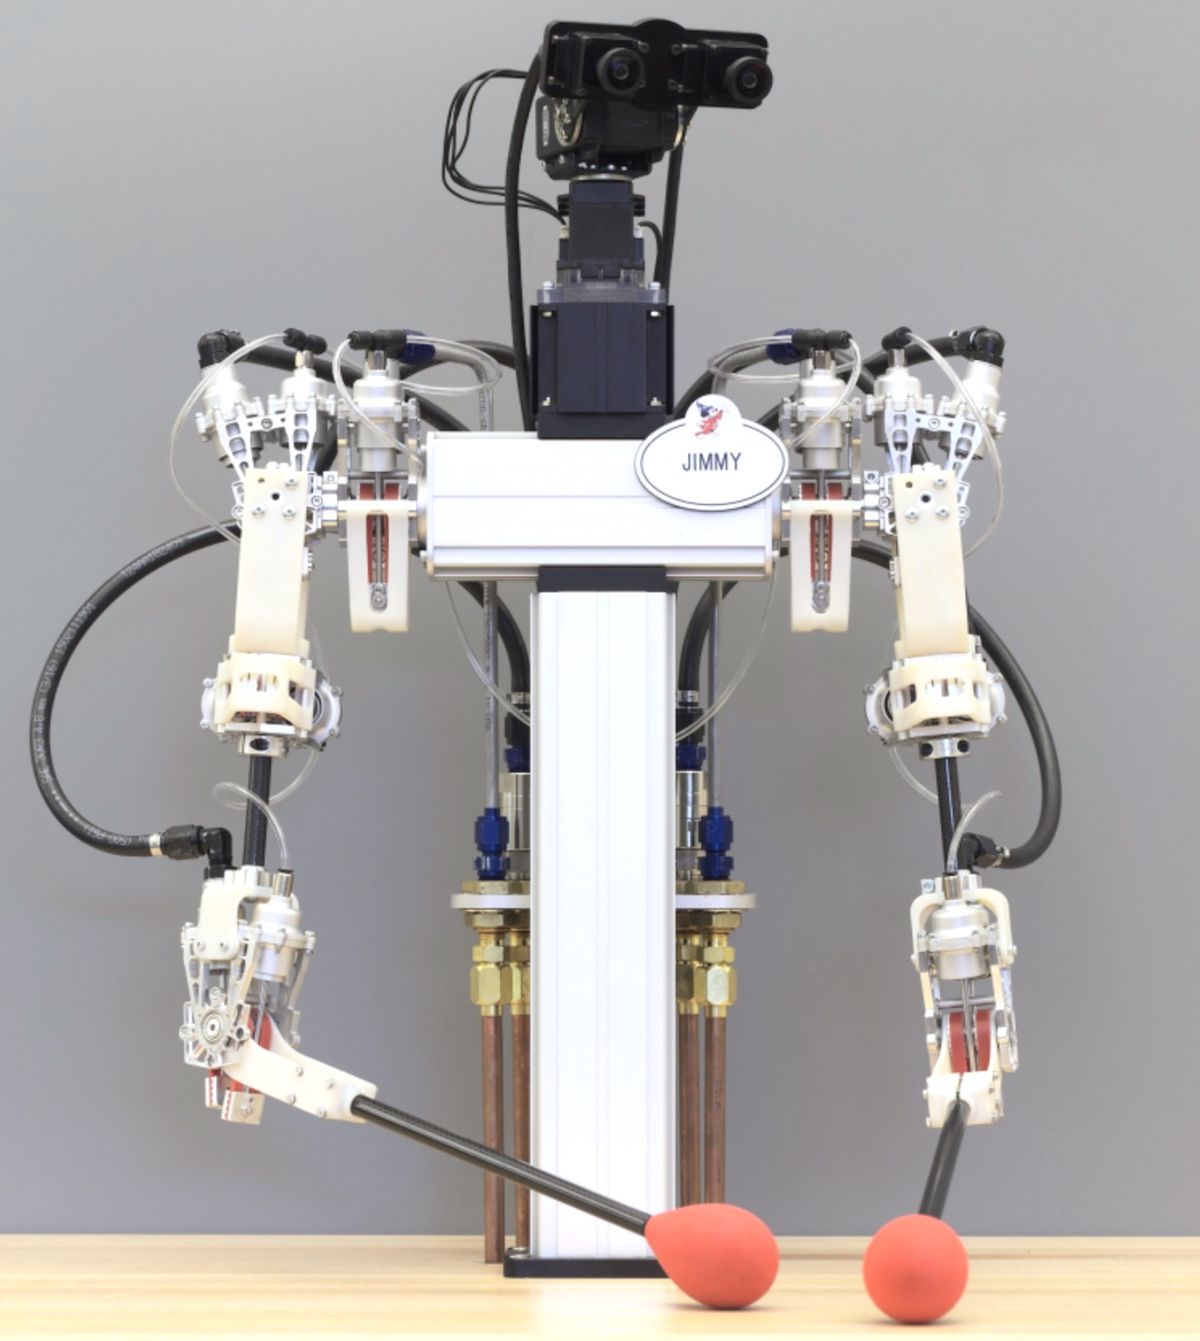 Disney Research's Jimmy, a robot powered by fluid air-water actuators